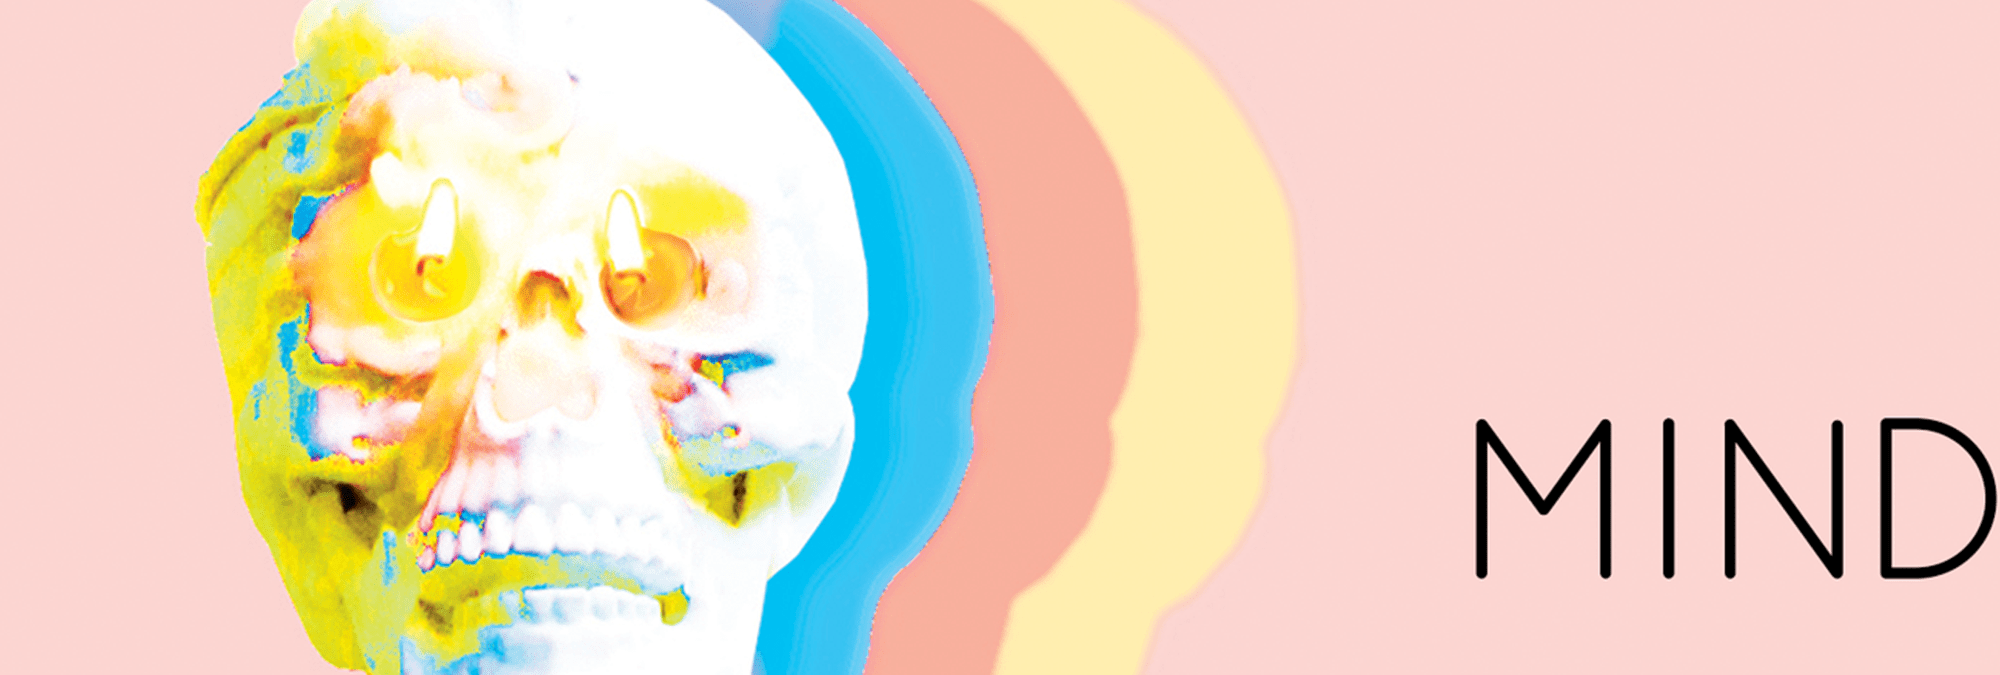 MIND II feature photo skull in negative with artistic pastel reverberations 